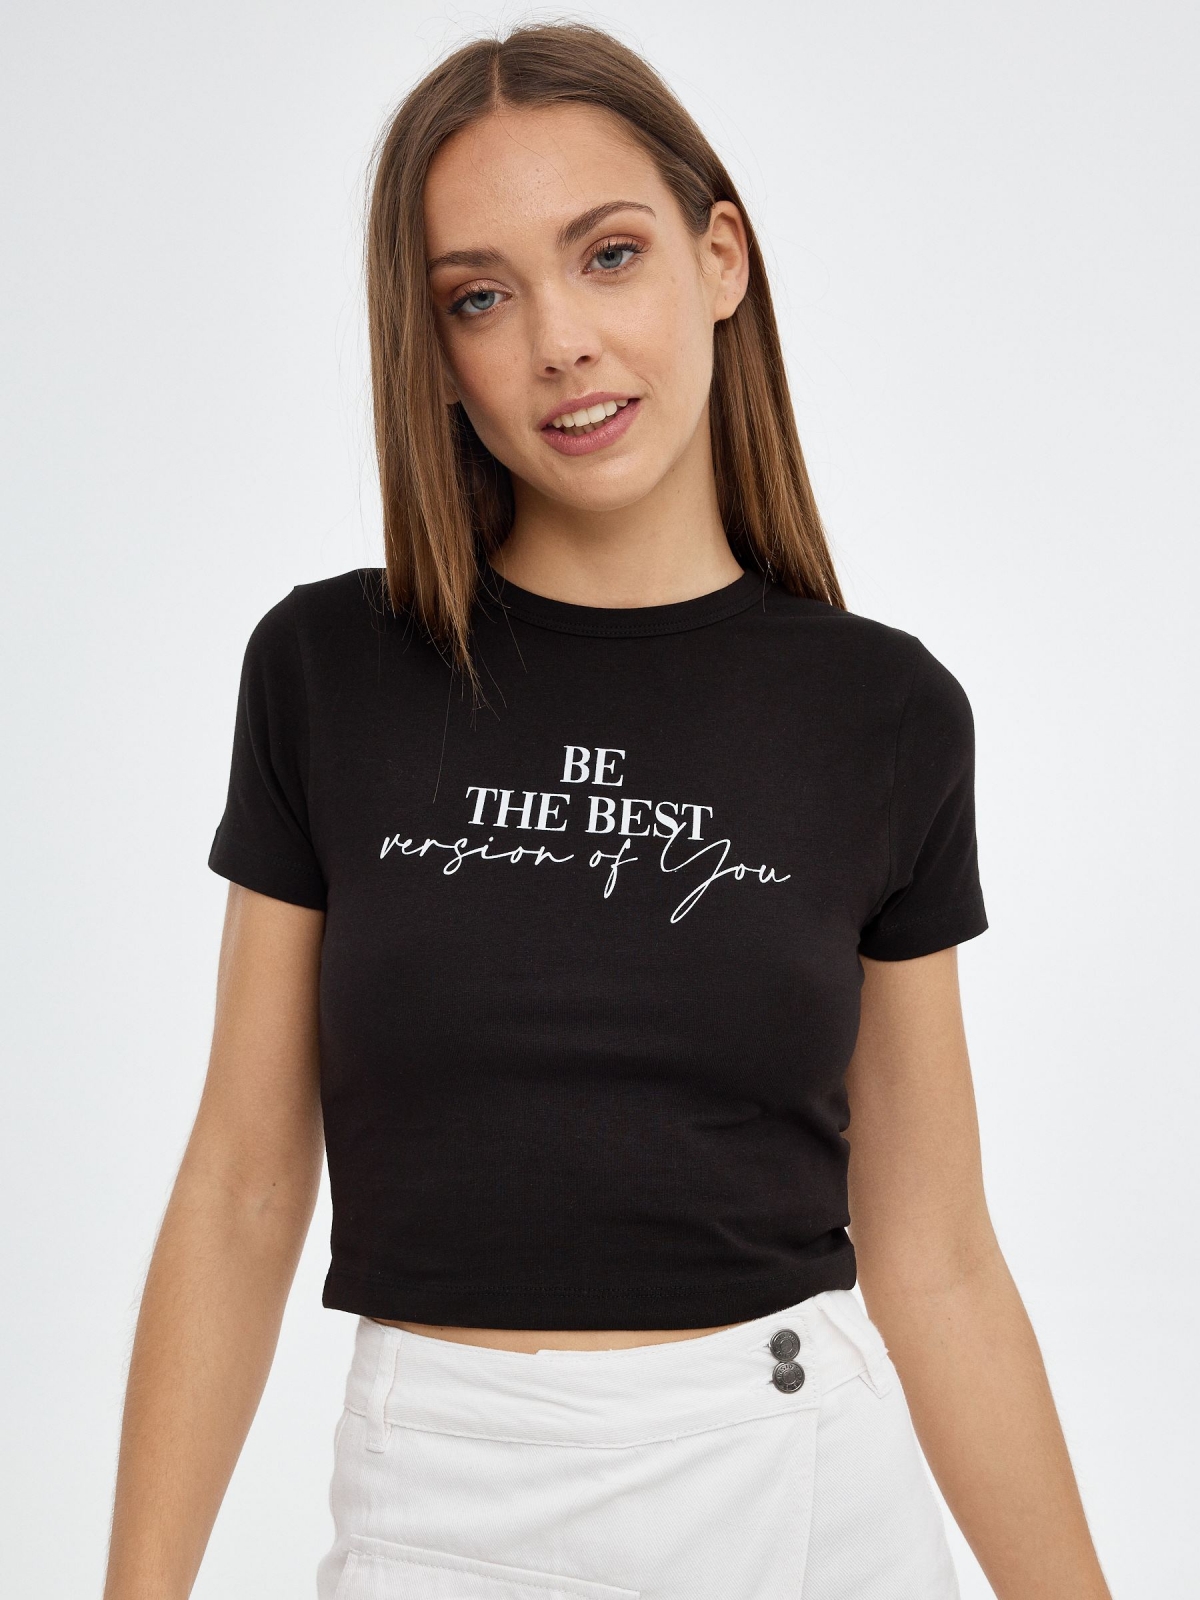 Be the Best T-shirt